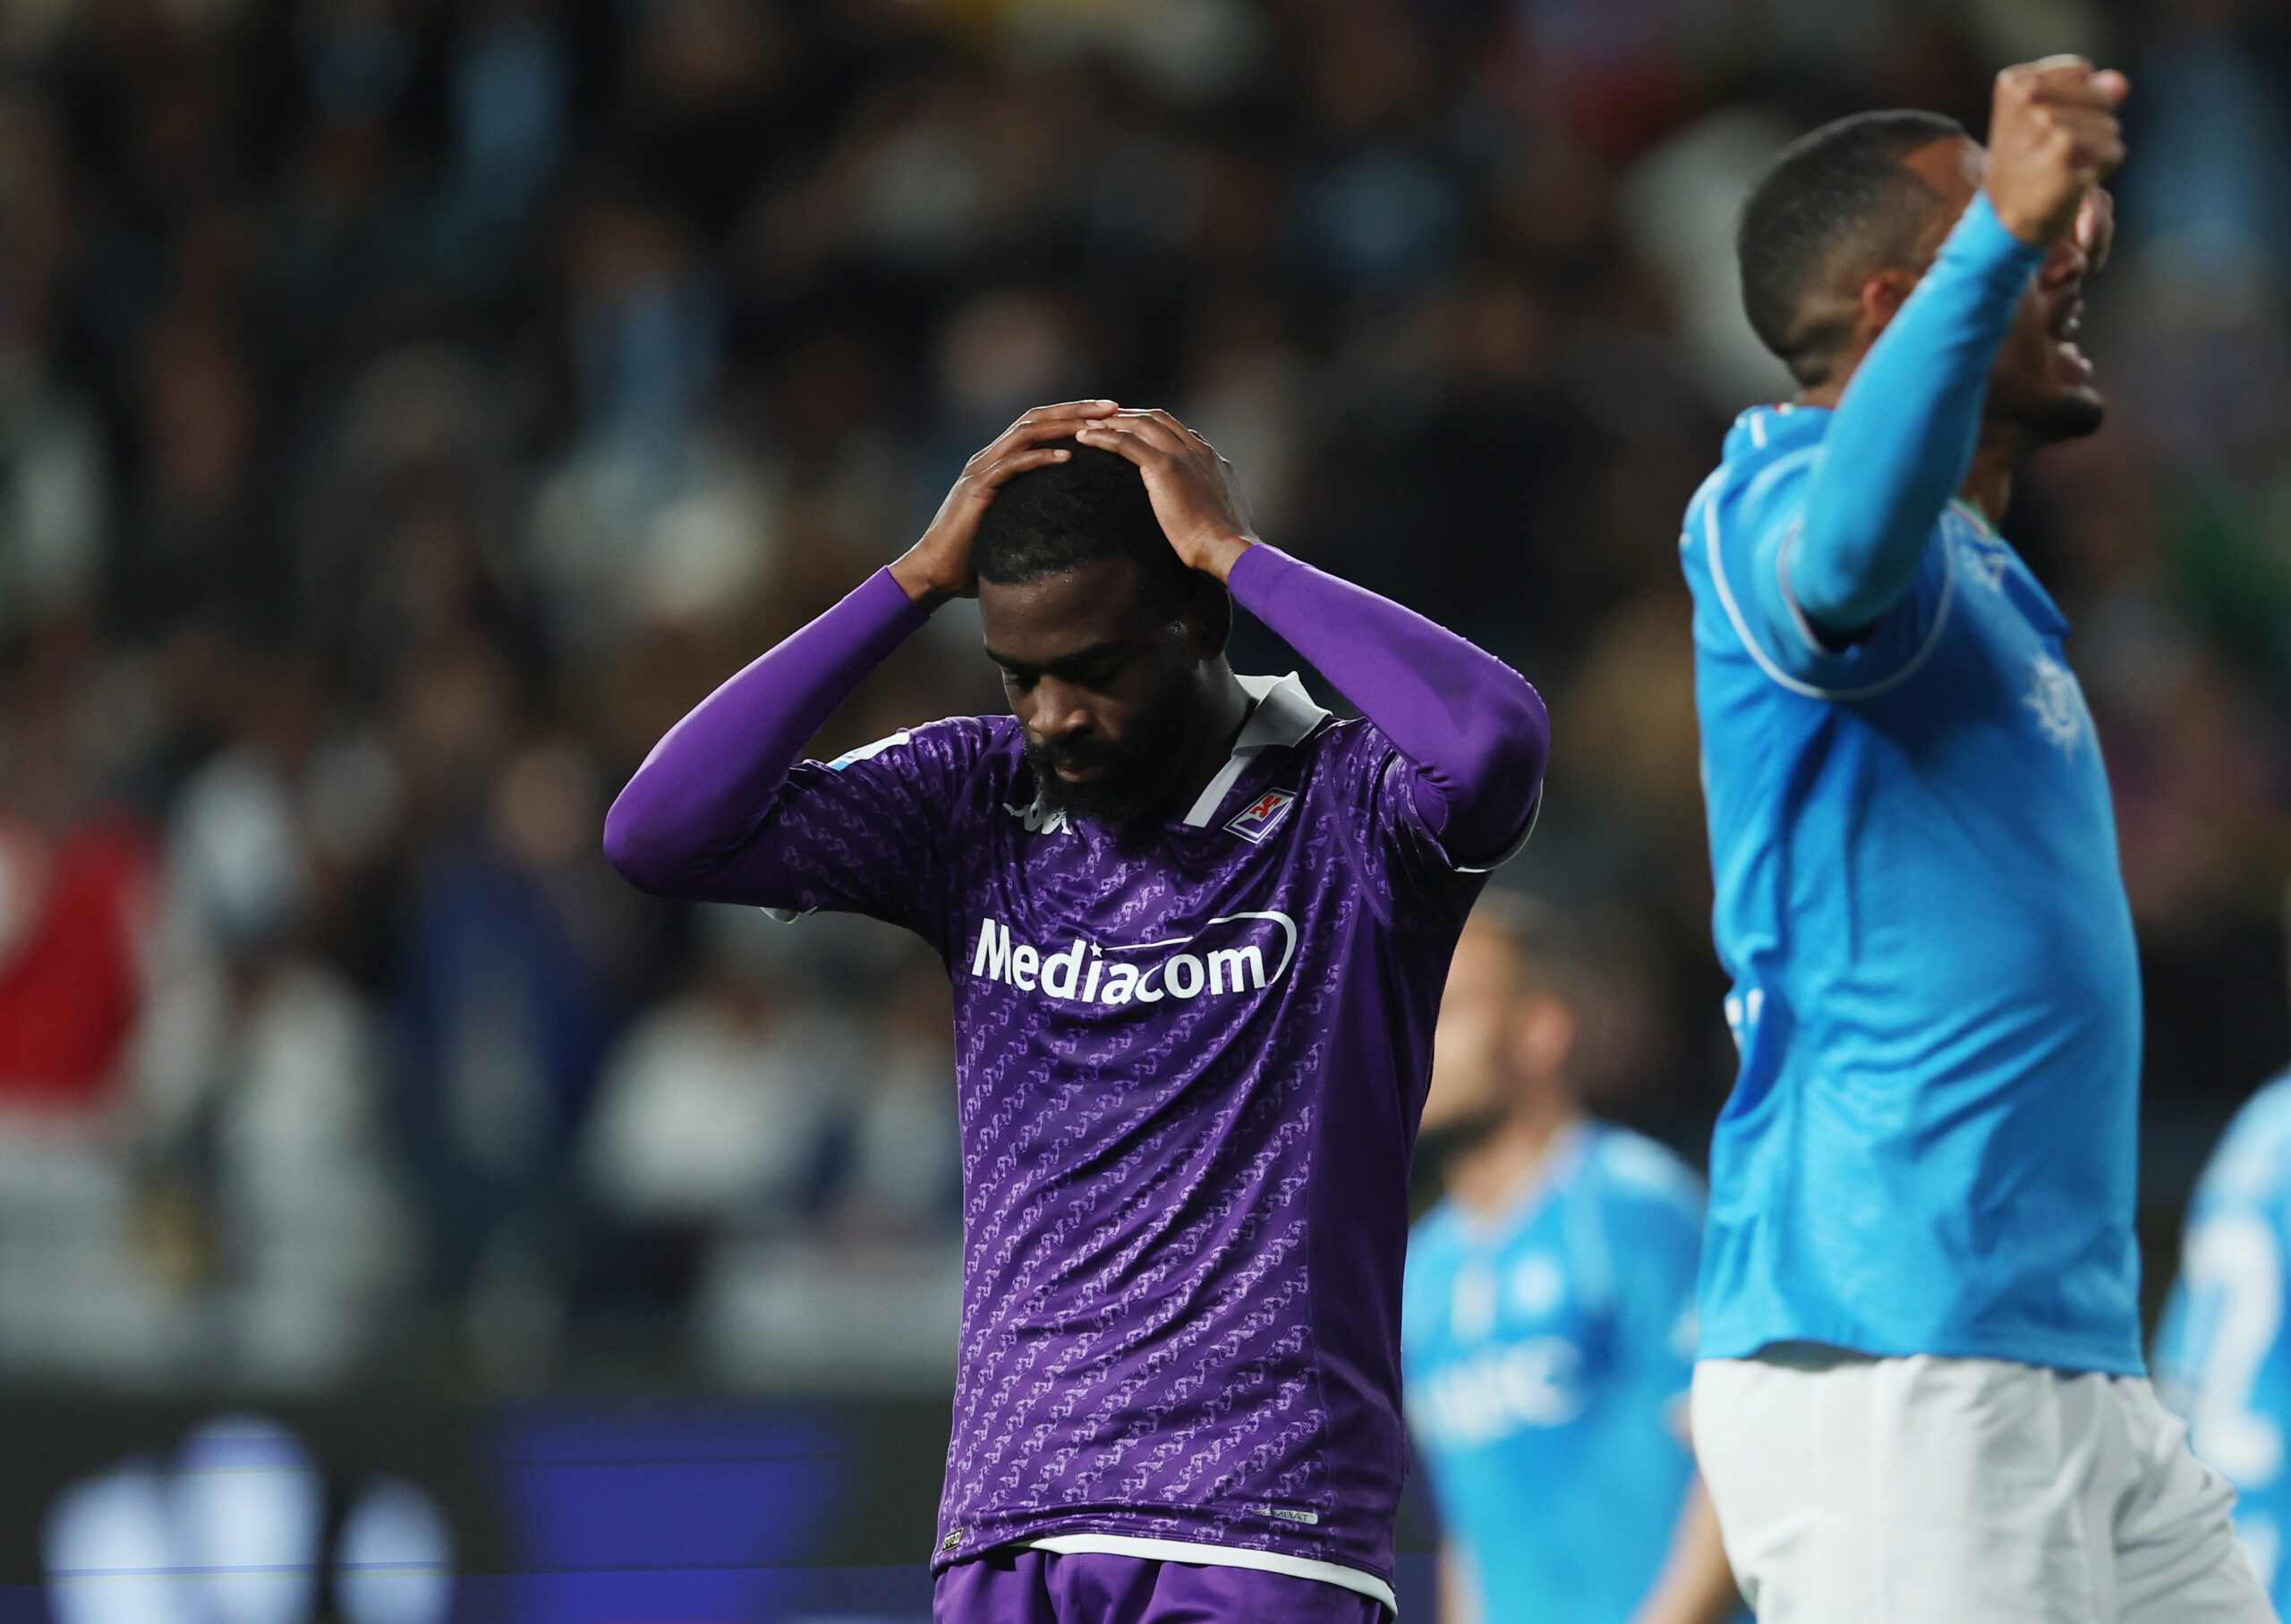 Roma will have to find other wingers to strengthen their attack because Fiorentina have taken Jonathan Ikoné off the market.